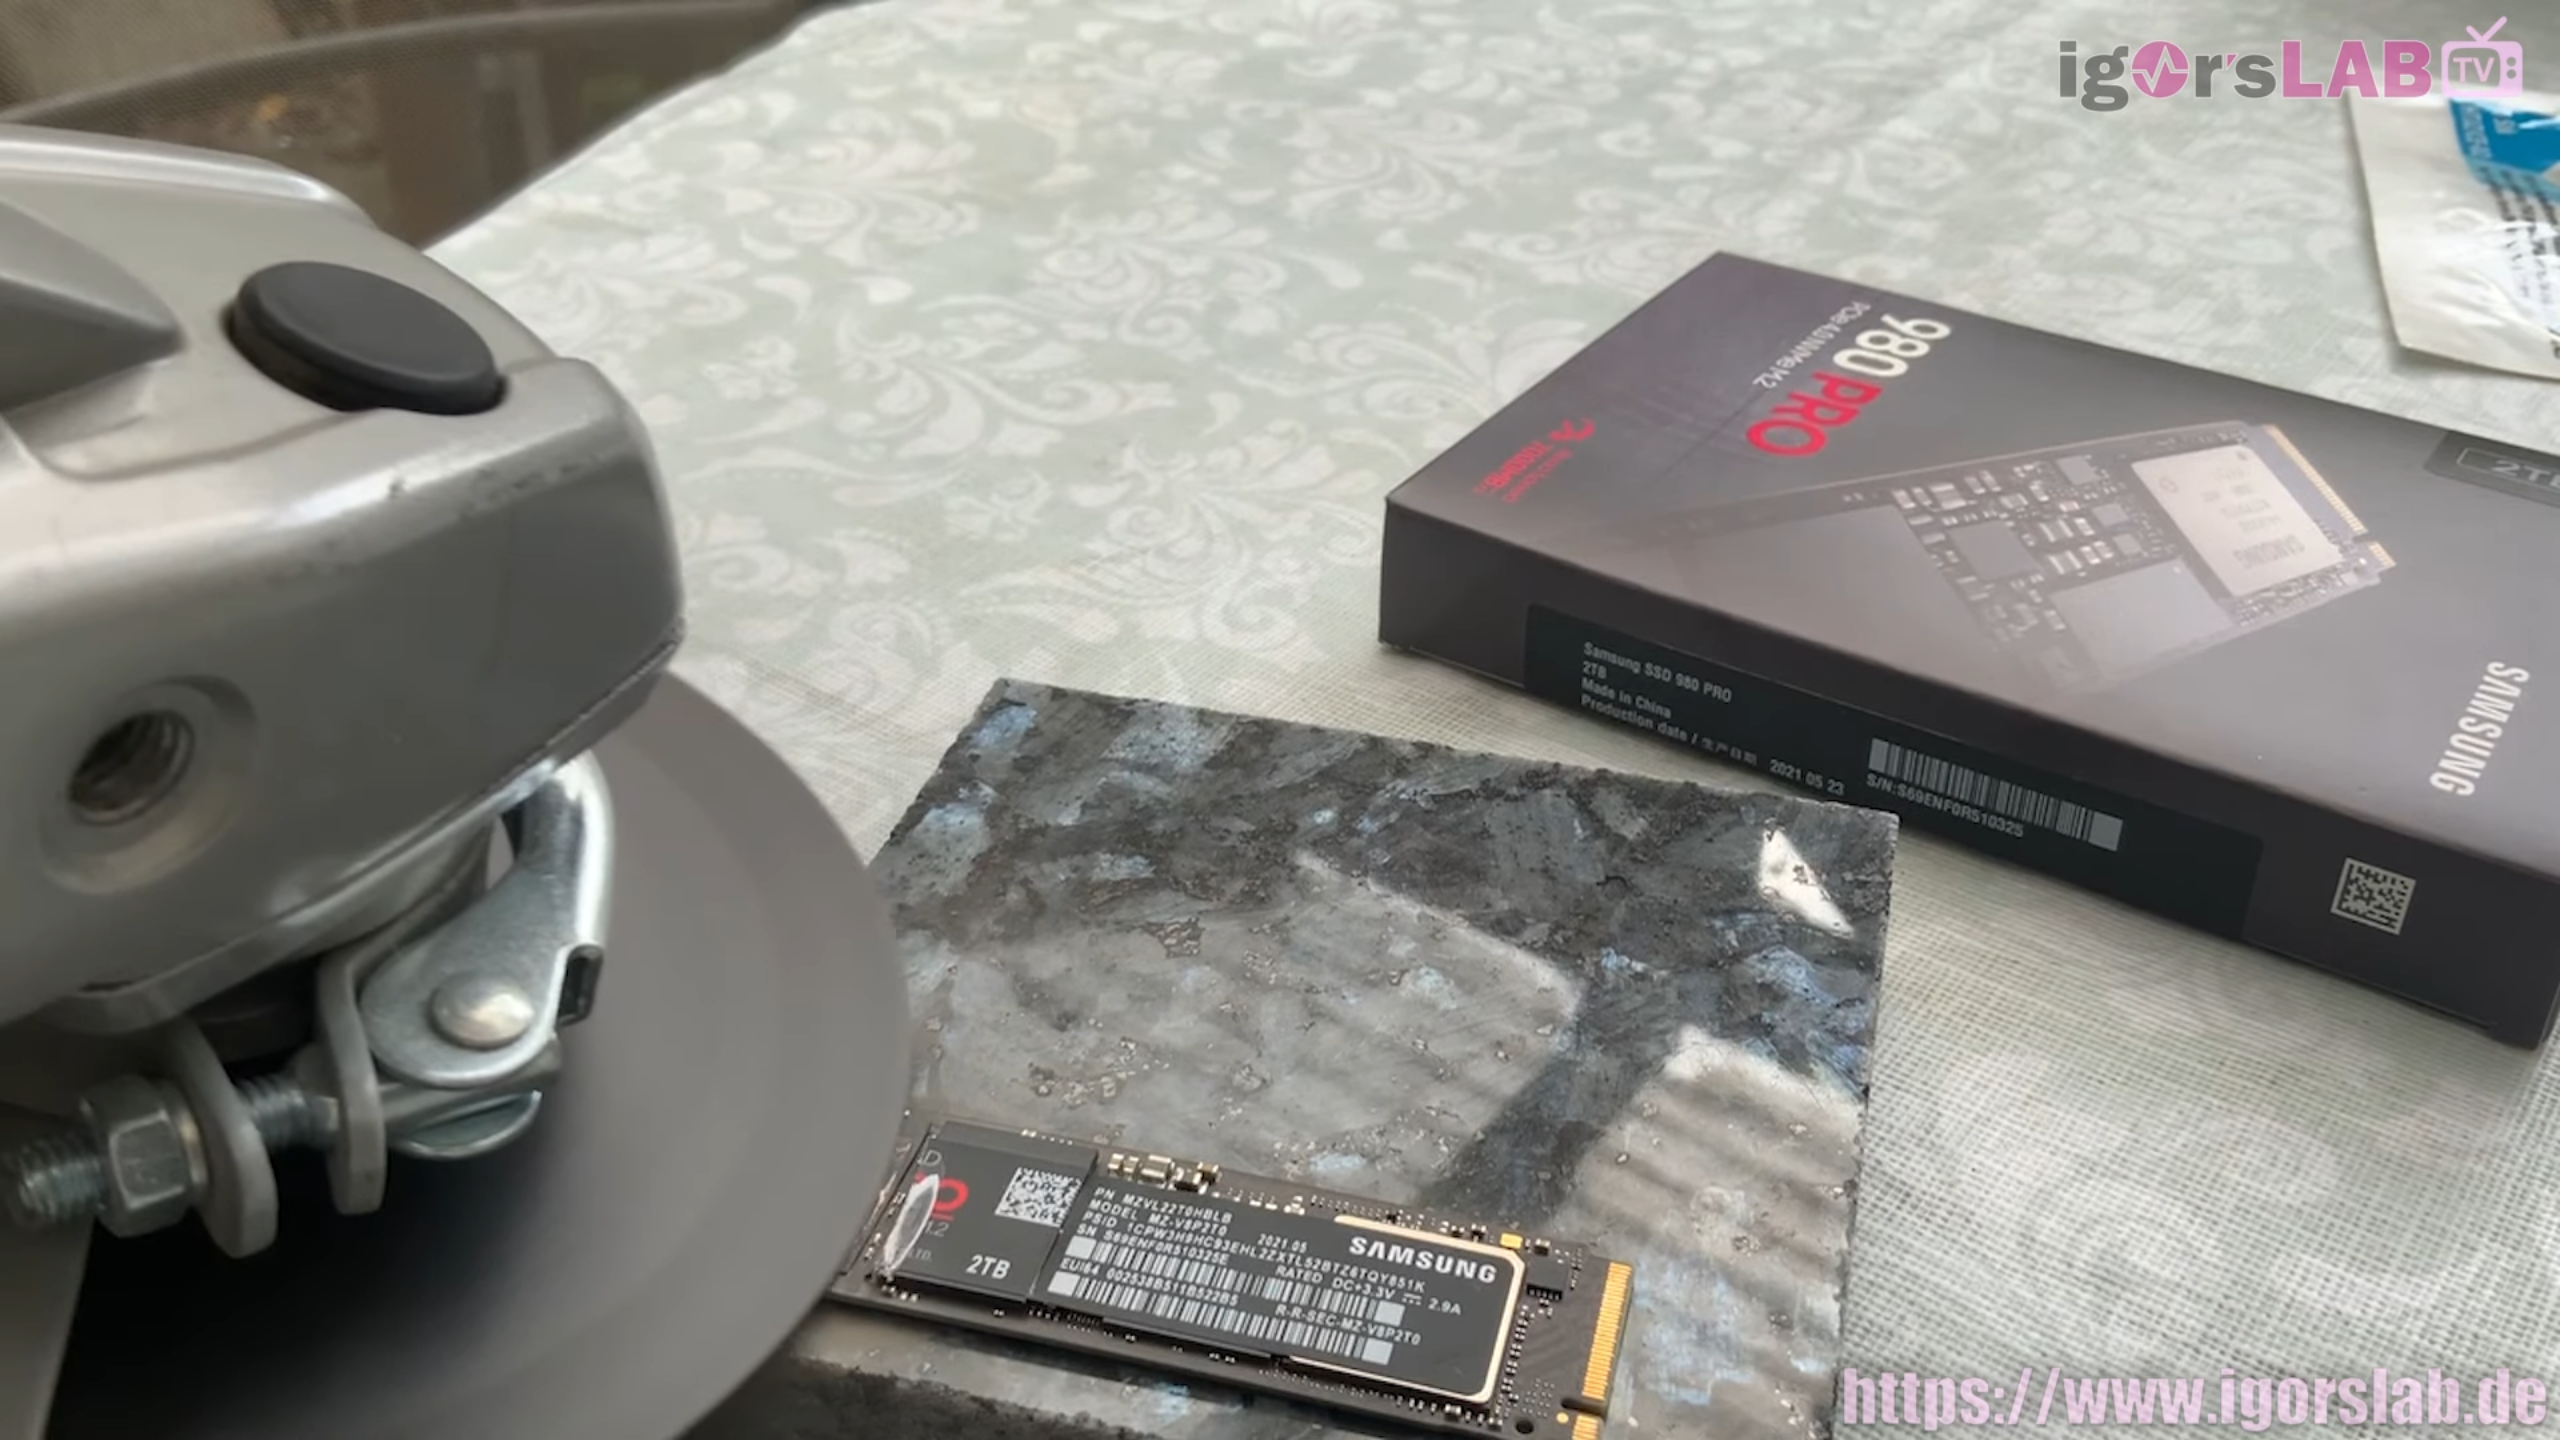 Samsung asks customer to destroy high-end 980 Pro SSD before sending it  back for RMA -  News